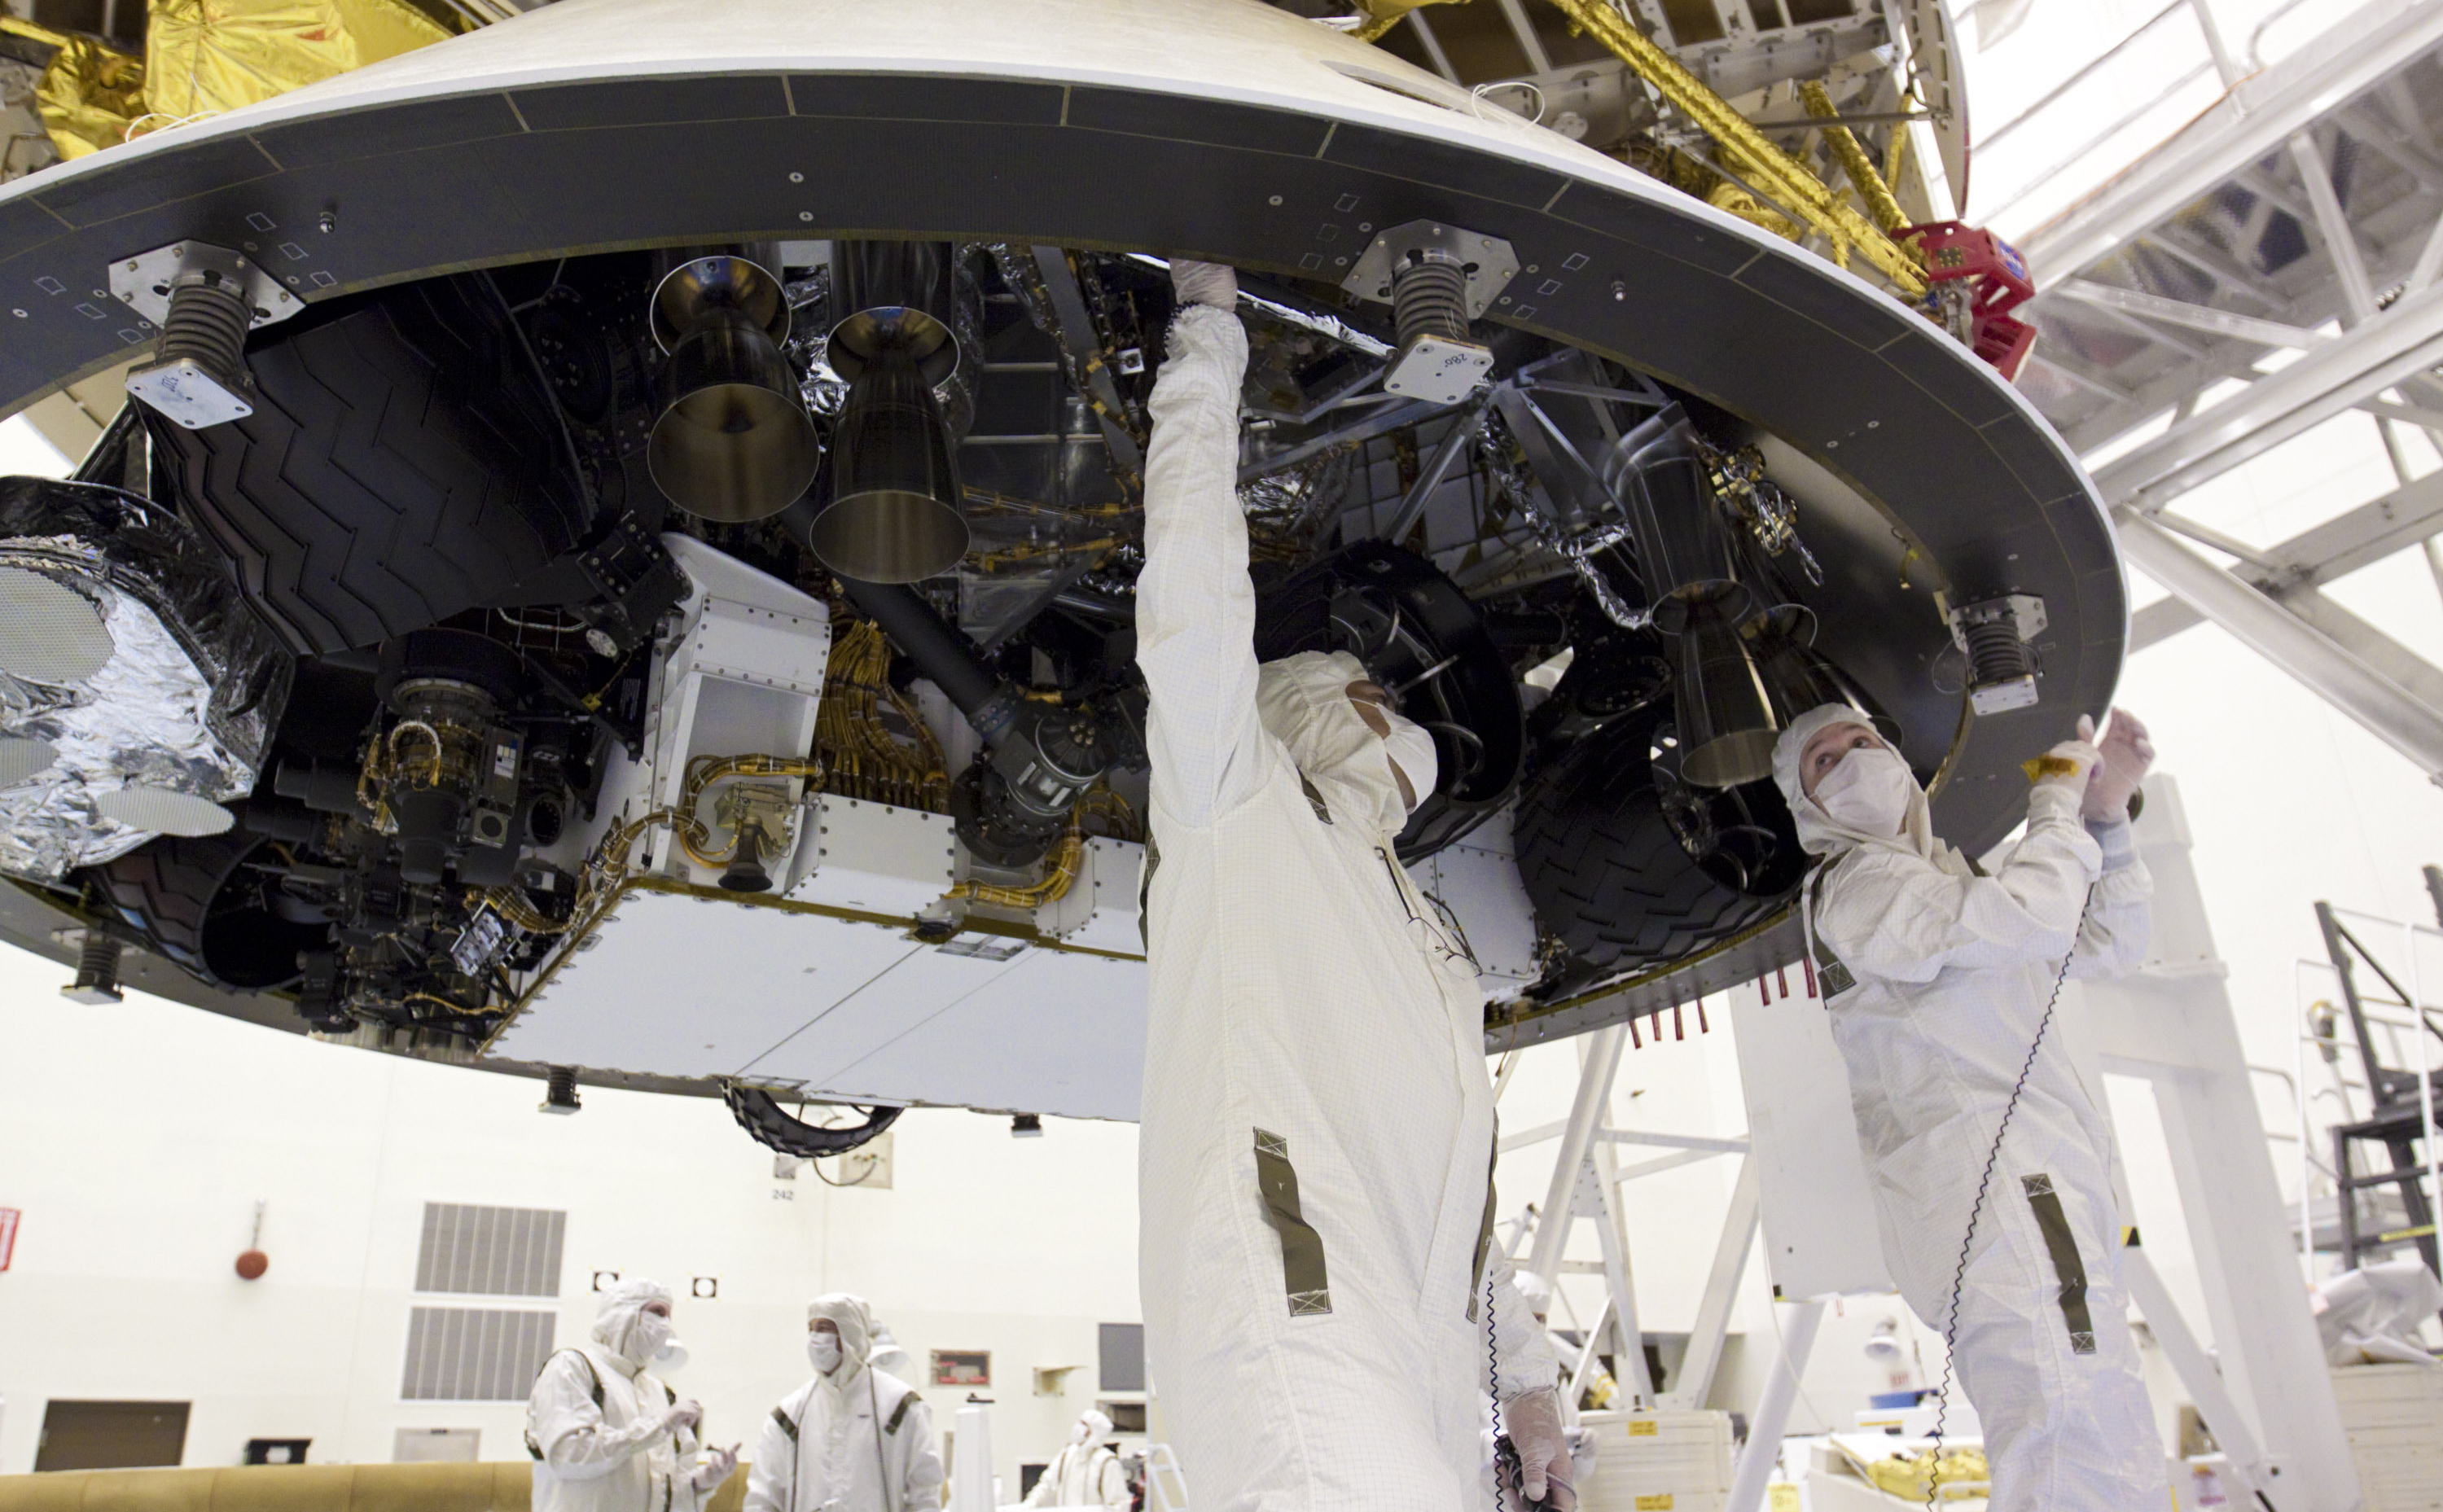 In the Payload Hazardous Servicing Facility at NASA's Kennedy Space Center in Florida, technicians work beneath NASA's Mars Science Laboratory (MSL) mission aeroshell, (containing the compact car-sized rover Curiosity), which has been mated to the cruise stage.